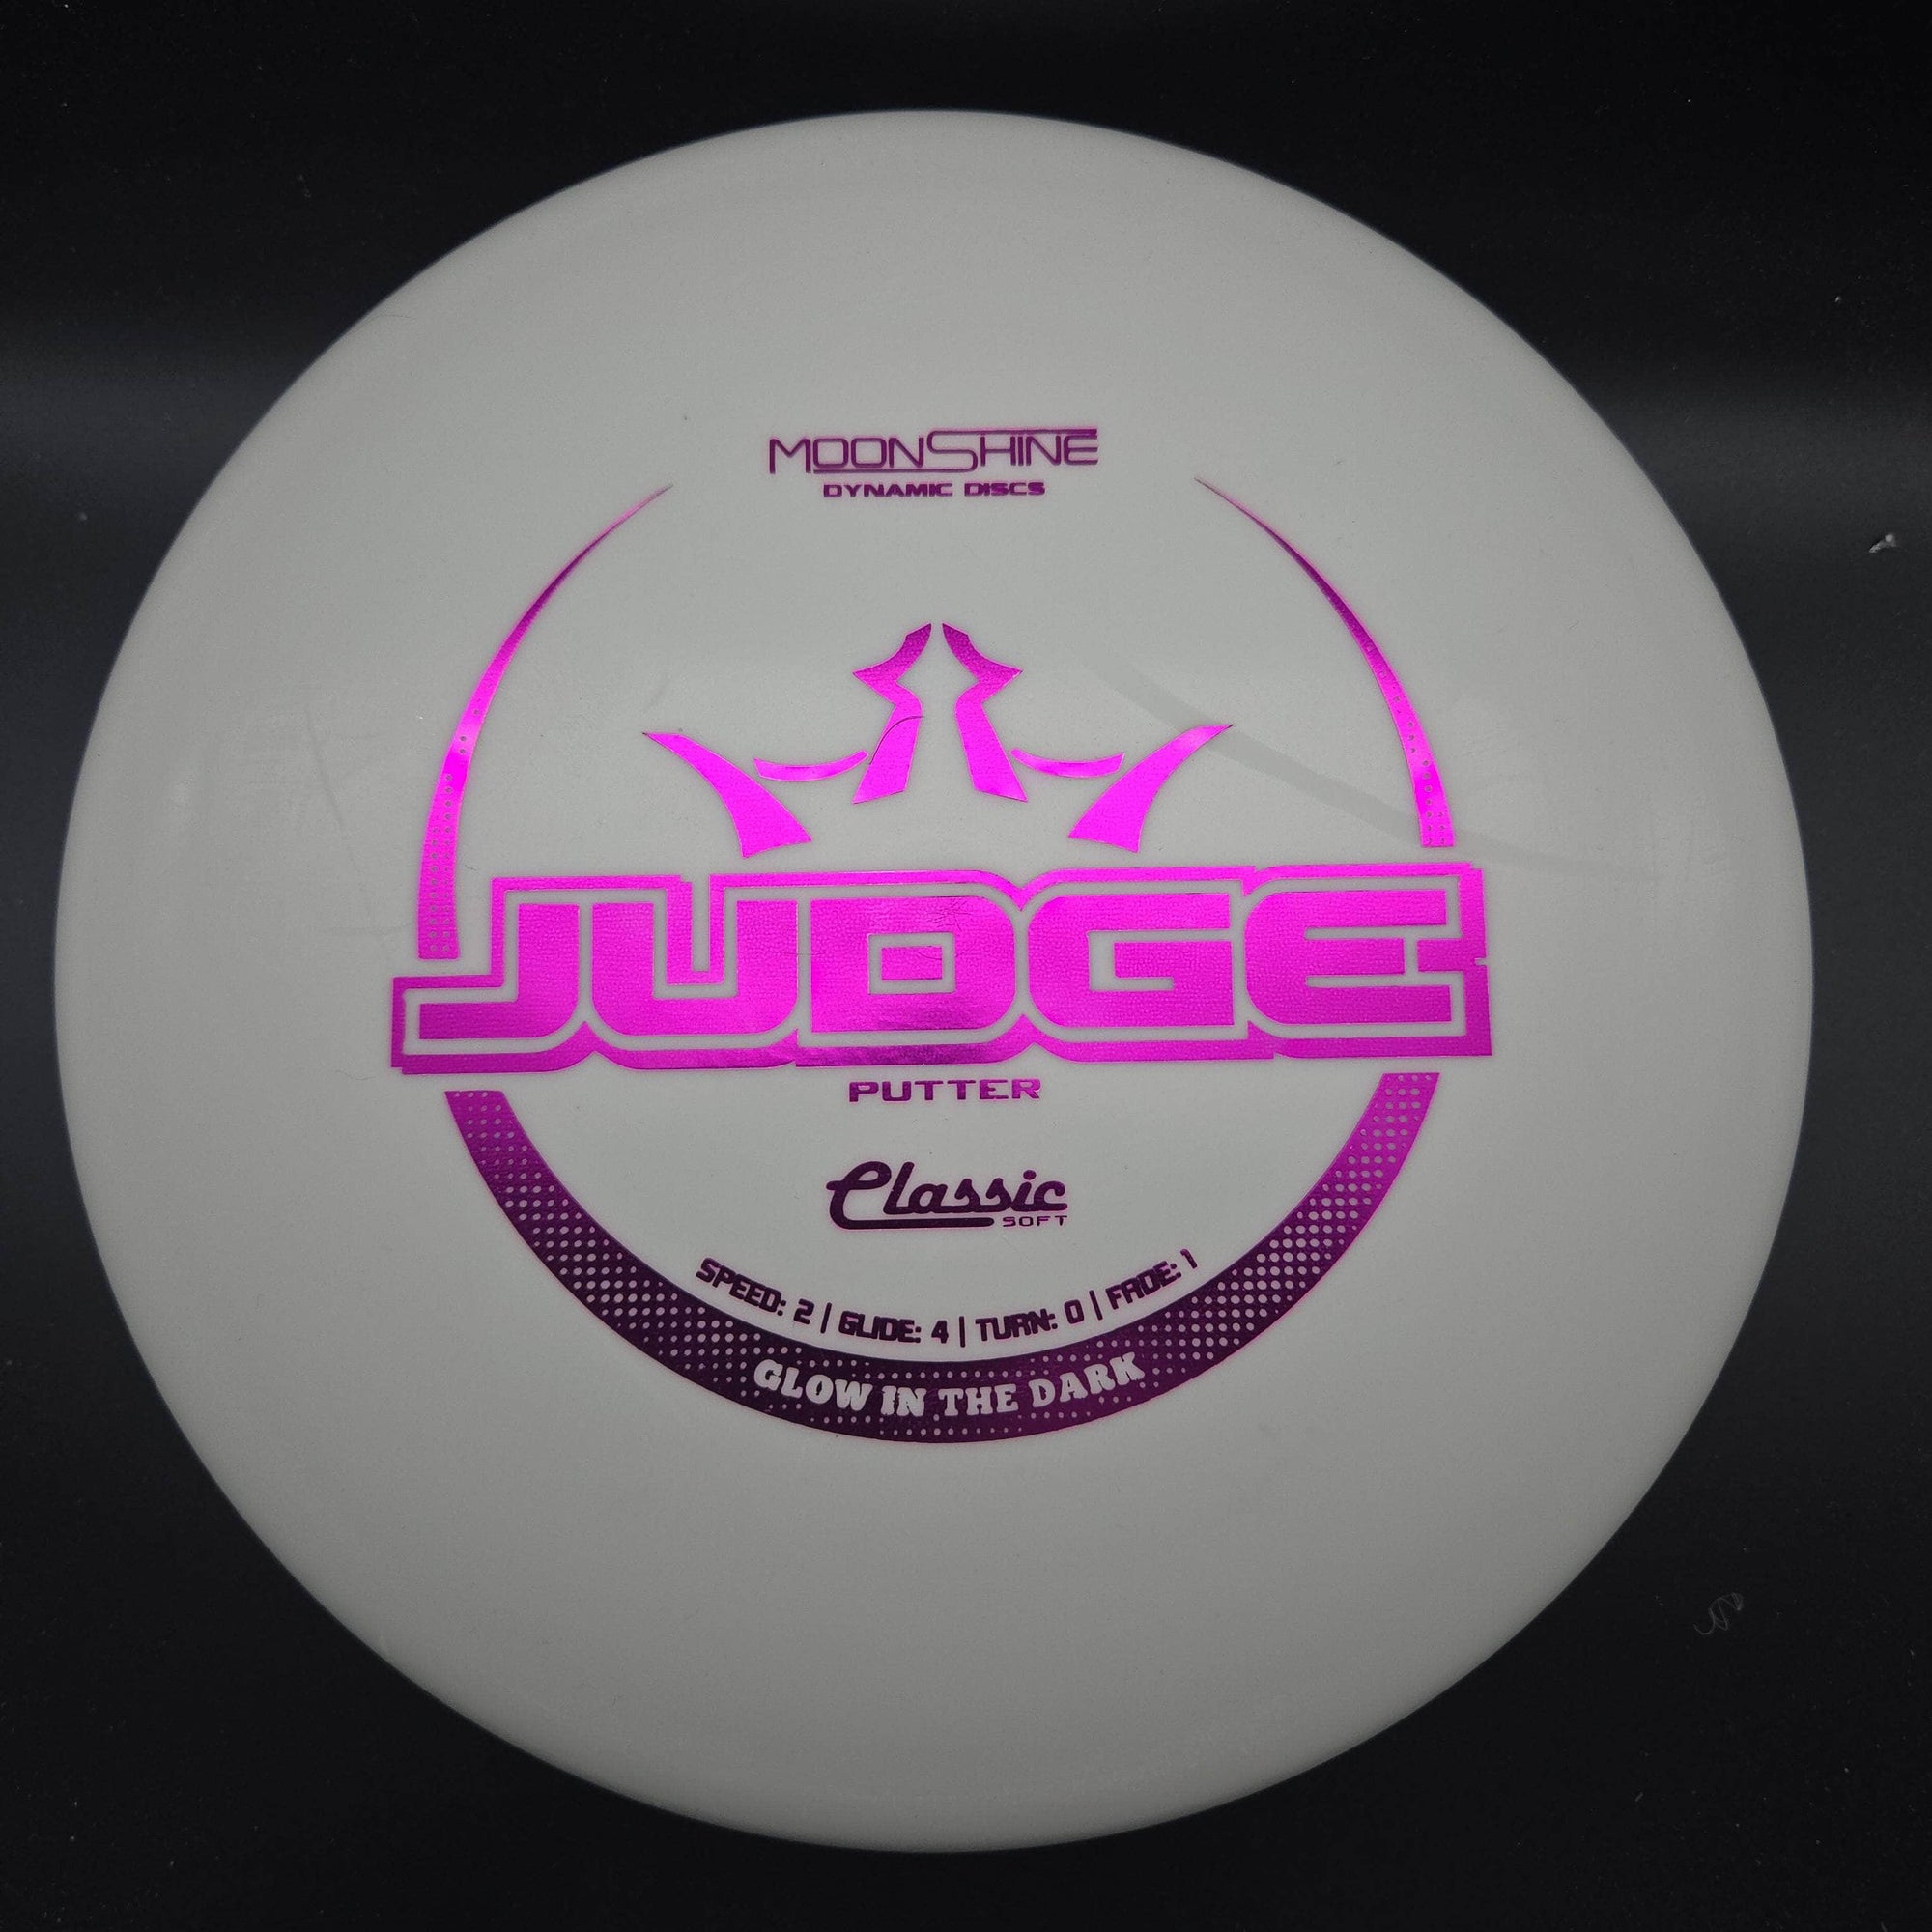 Dynamic Discs Putter White Purple Stamp 176g Judge, Classic Soft Moonshine